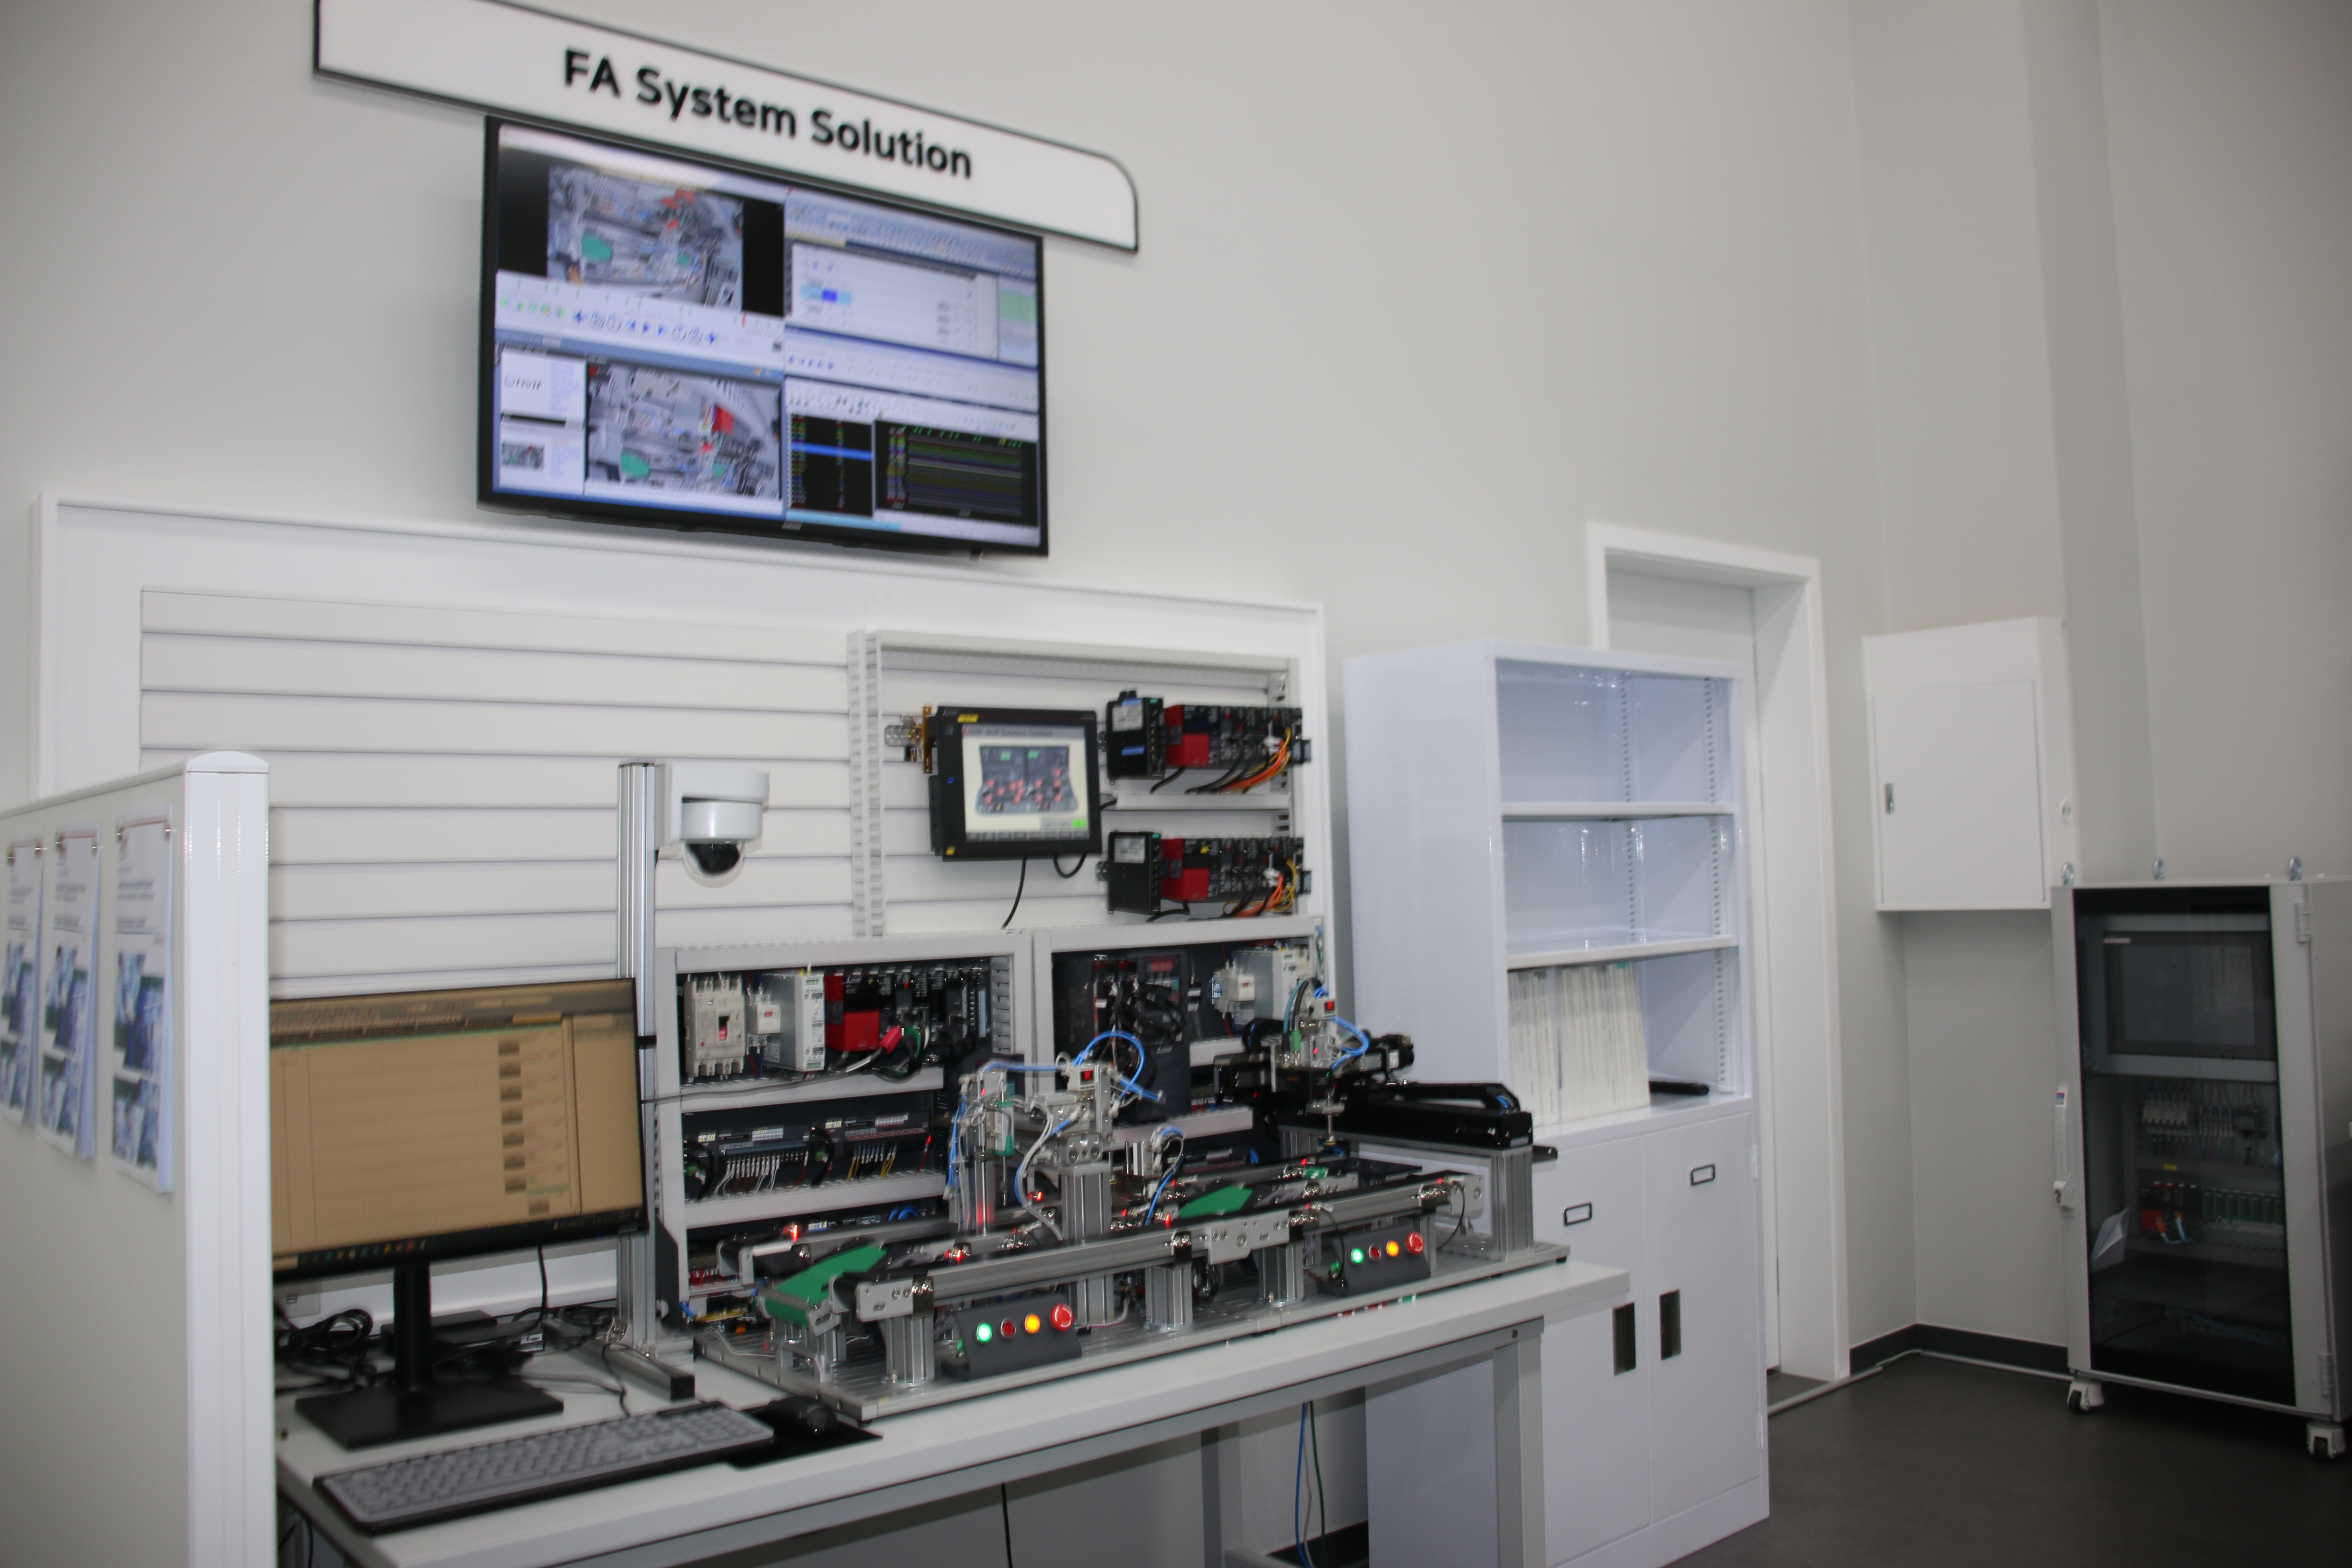 FA System Solution Zone